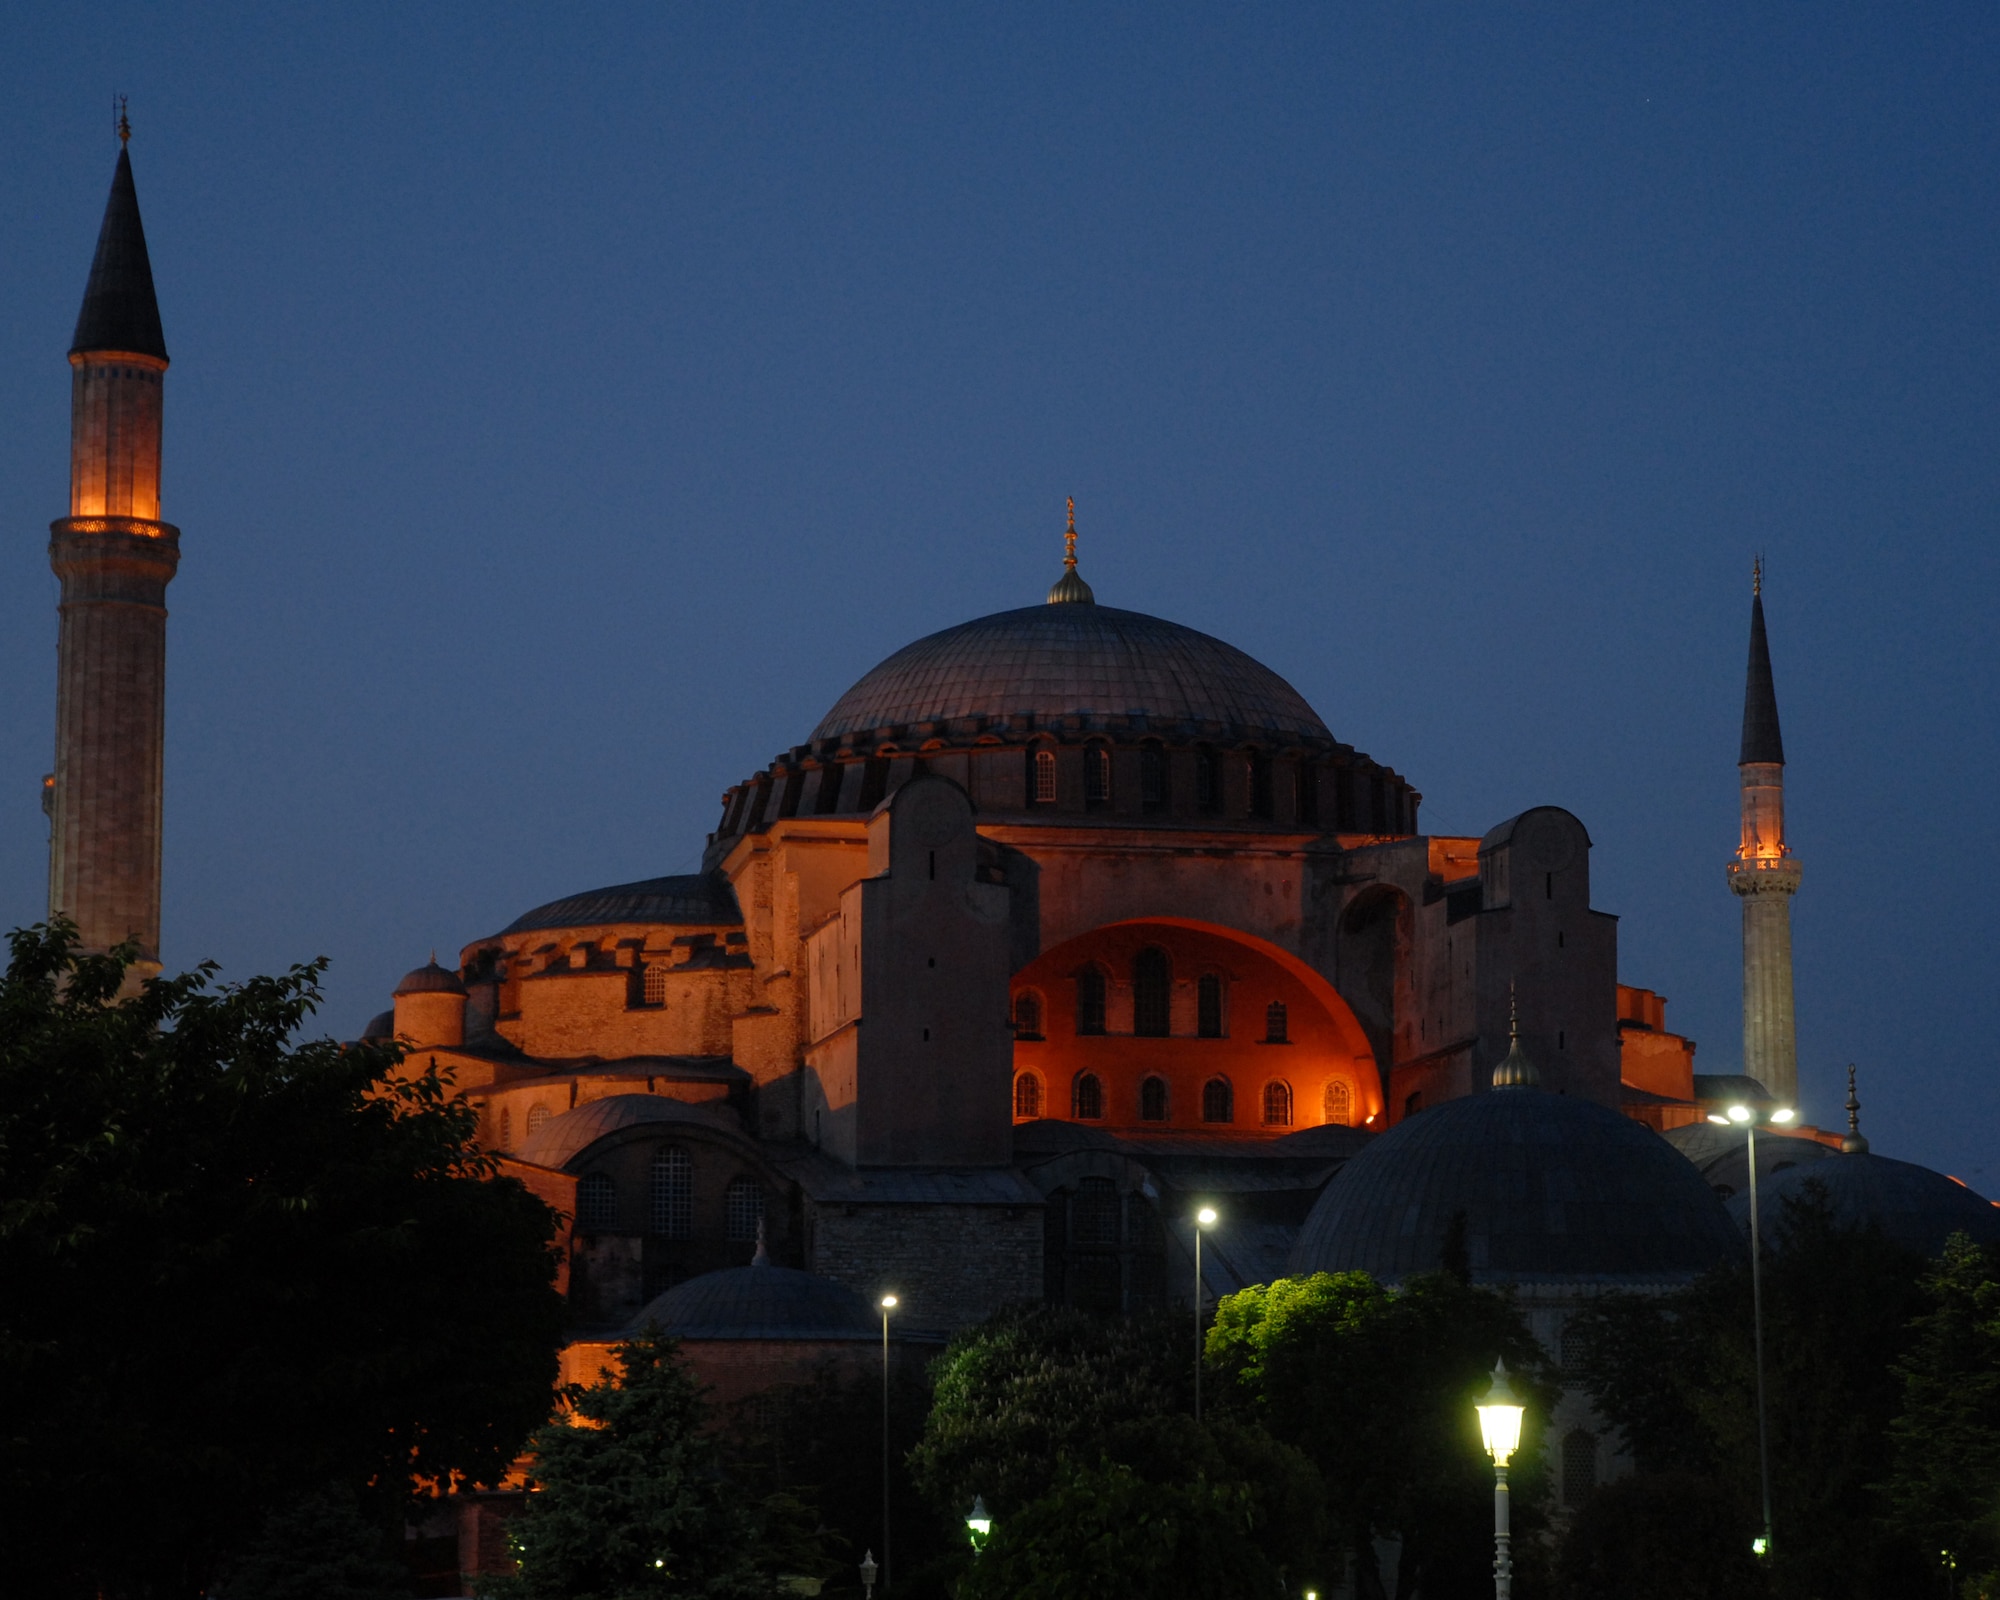 The Aya Sofya or as it is called in English, the Church of the Divine Wisdom, was completed in 537 AD by Emperor Justinian as a church and then was converted to a mosque in 1453 by Mehmet the Conqueror.  In 1935 Ataturk proclaimed the mosque a museum.  (U.S. Air Force photo/Staff Sgt. Lauren Padden)
